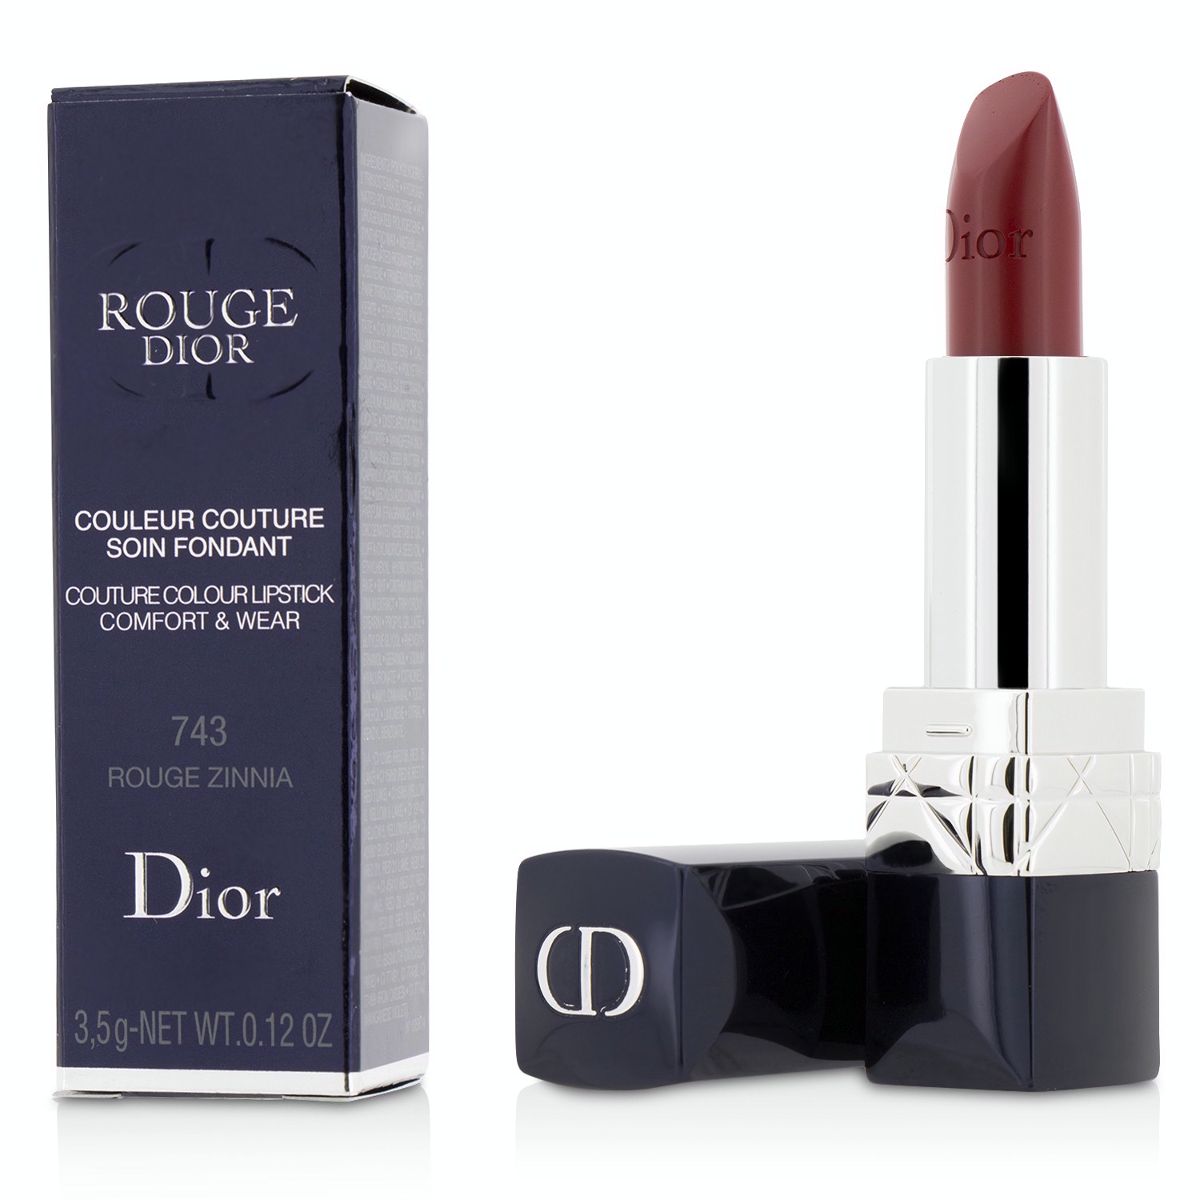 Rouge Dior Couture Colour Comfort  Wear Lipstick - # 743 Rouge Zinnia Christian Dior Image